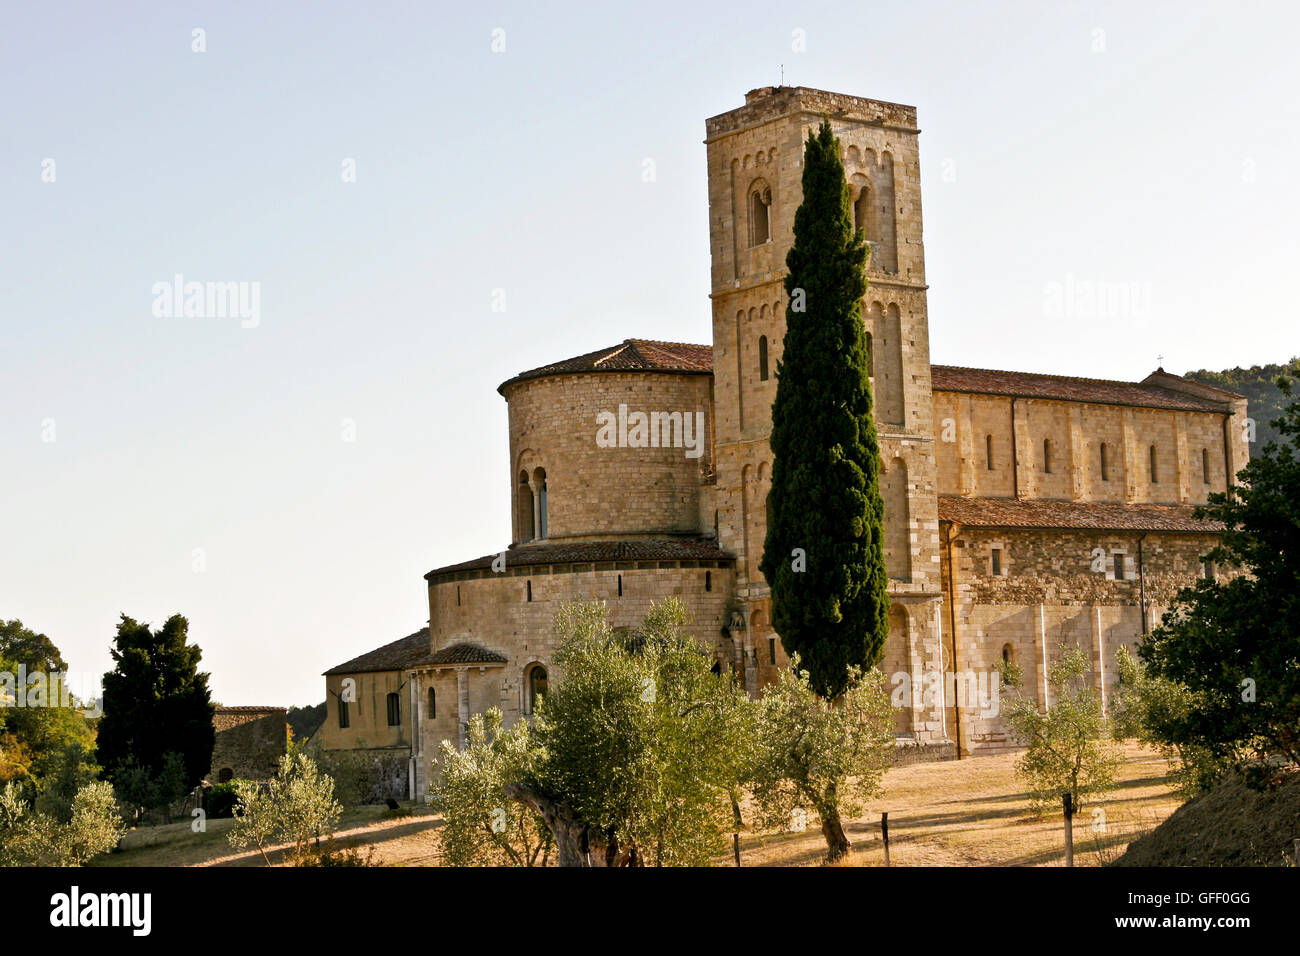 The Abbey of Sant'Antimo XII century, formerly a Benedictine monastery in the comune of Montalcino, Siena, Tuscany, central Italy, Europe, EU Stock Photo